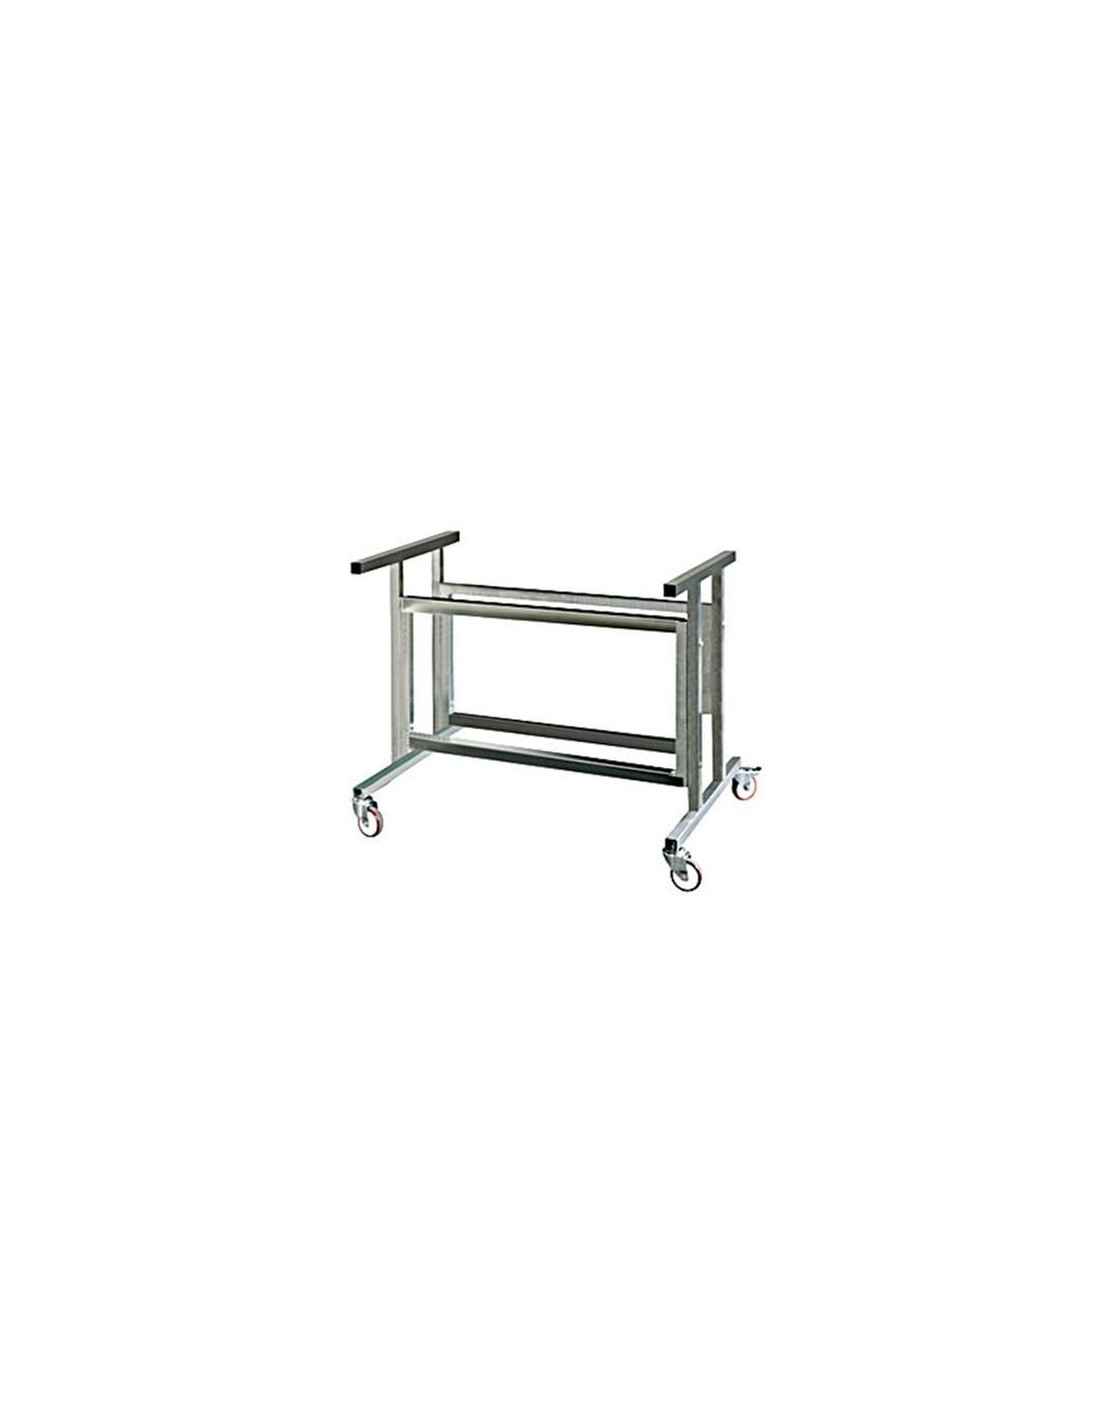 Stainless steel trolley with wheels (removable) - To Mod. Capri and Planetary 105 / P 126 / P